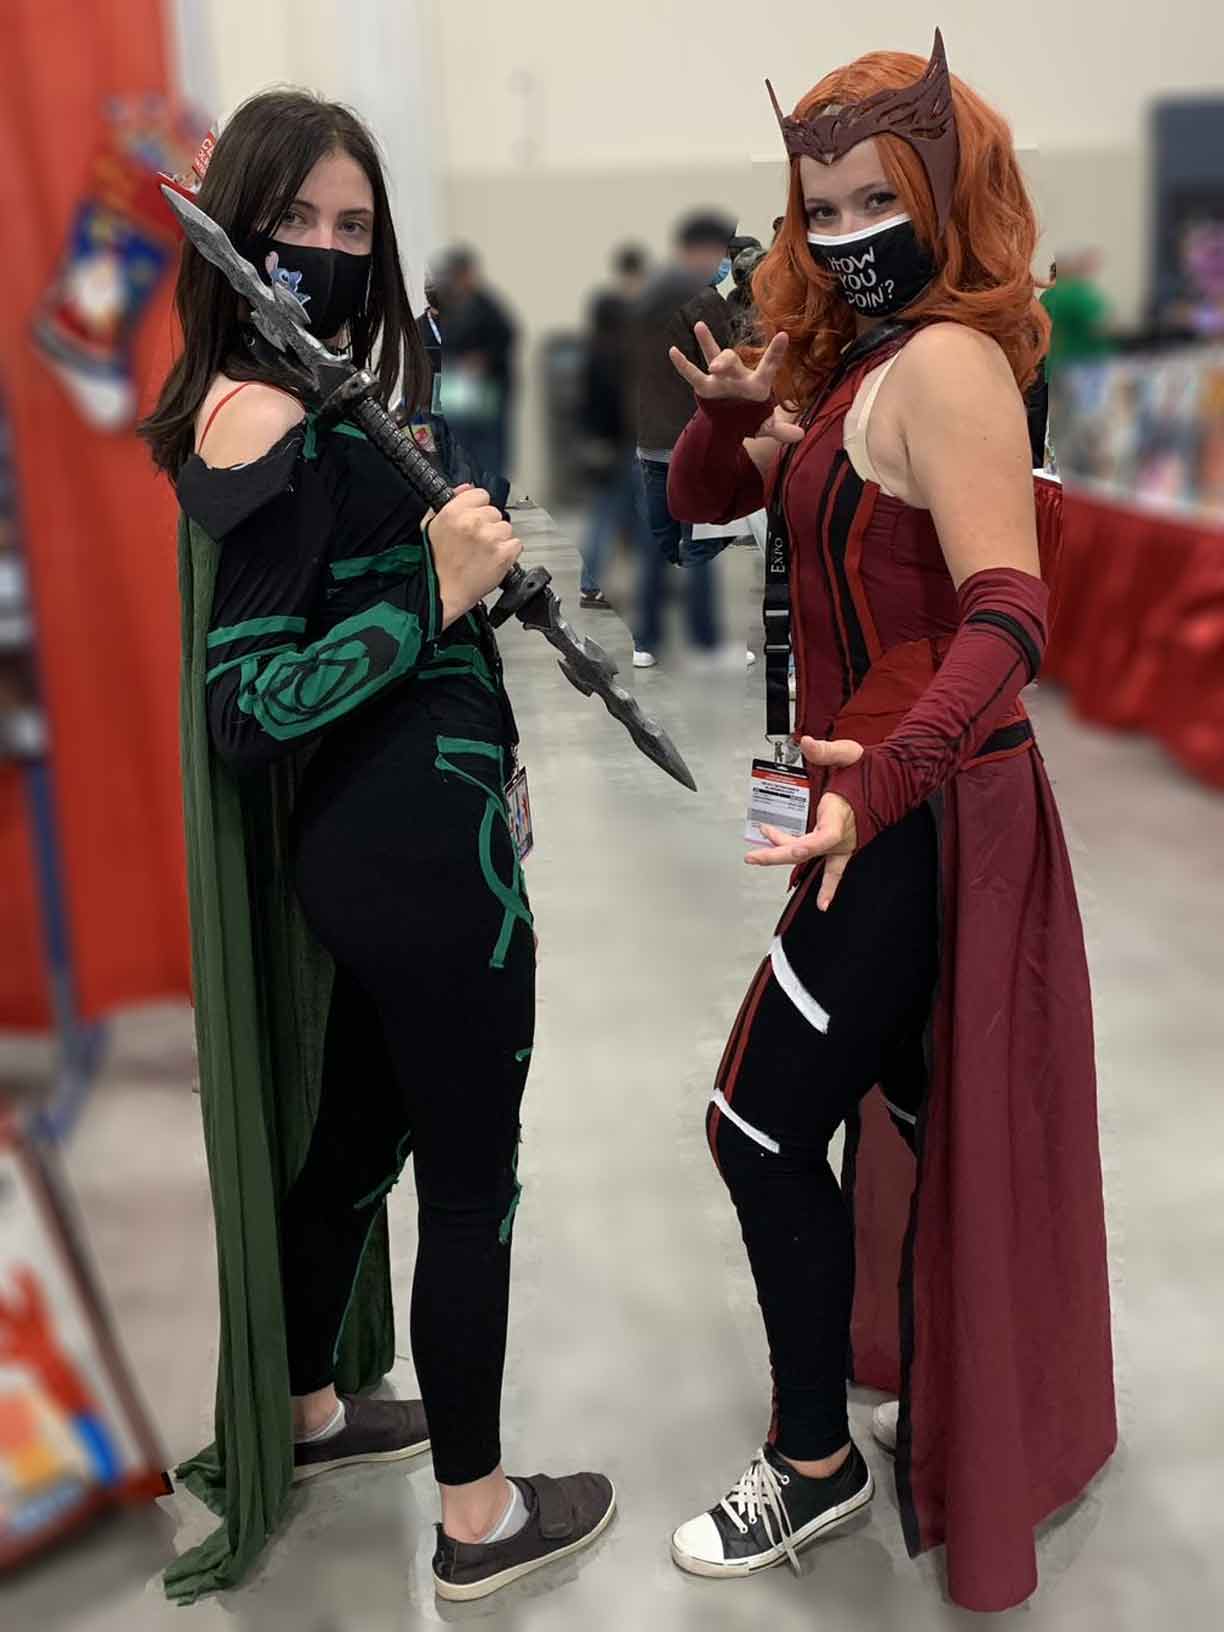 Hela and Scarlet Witch Calgary Expo 2021 Cosplay